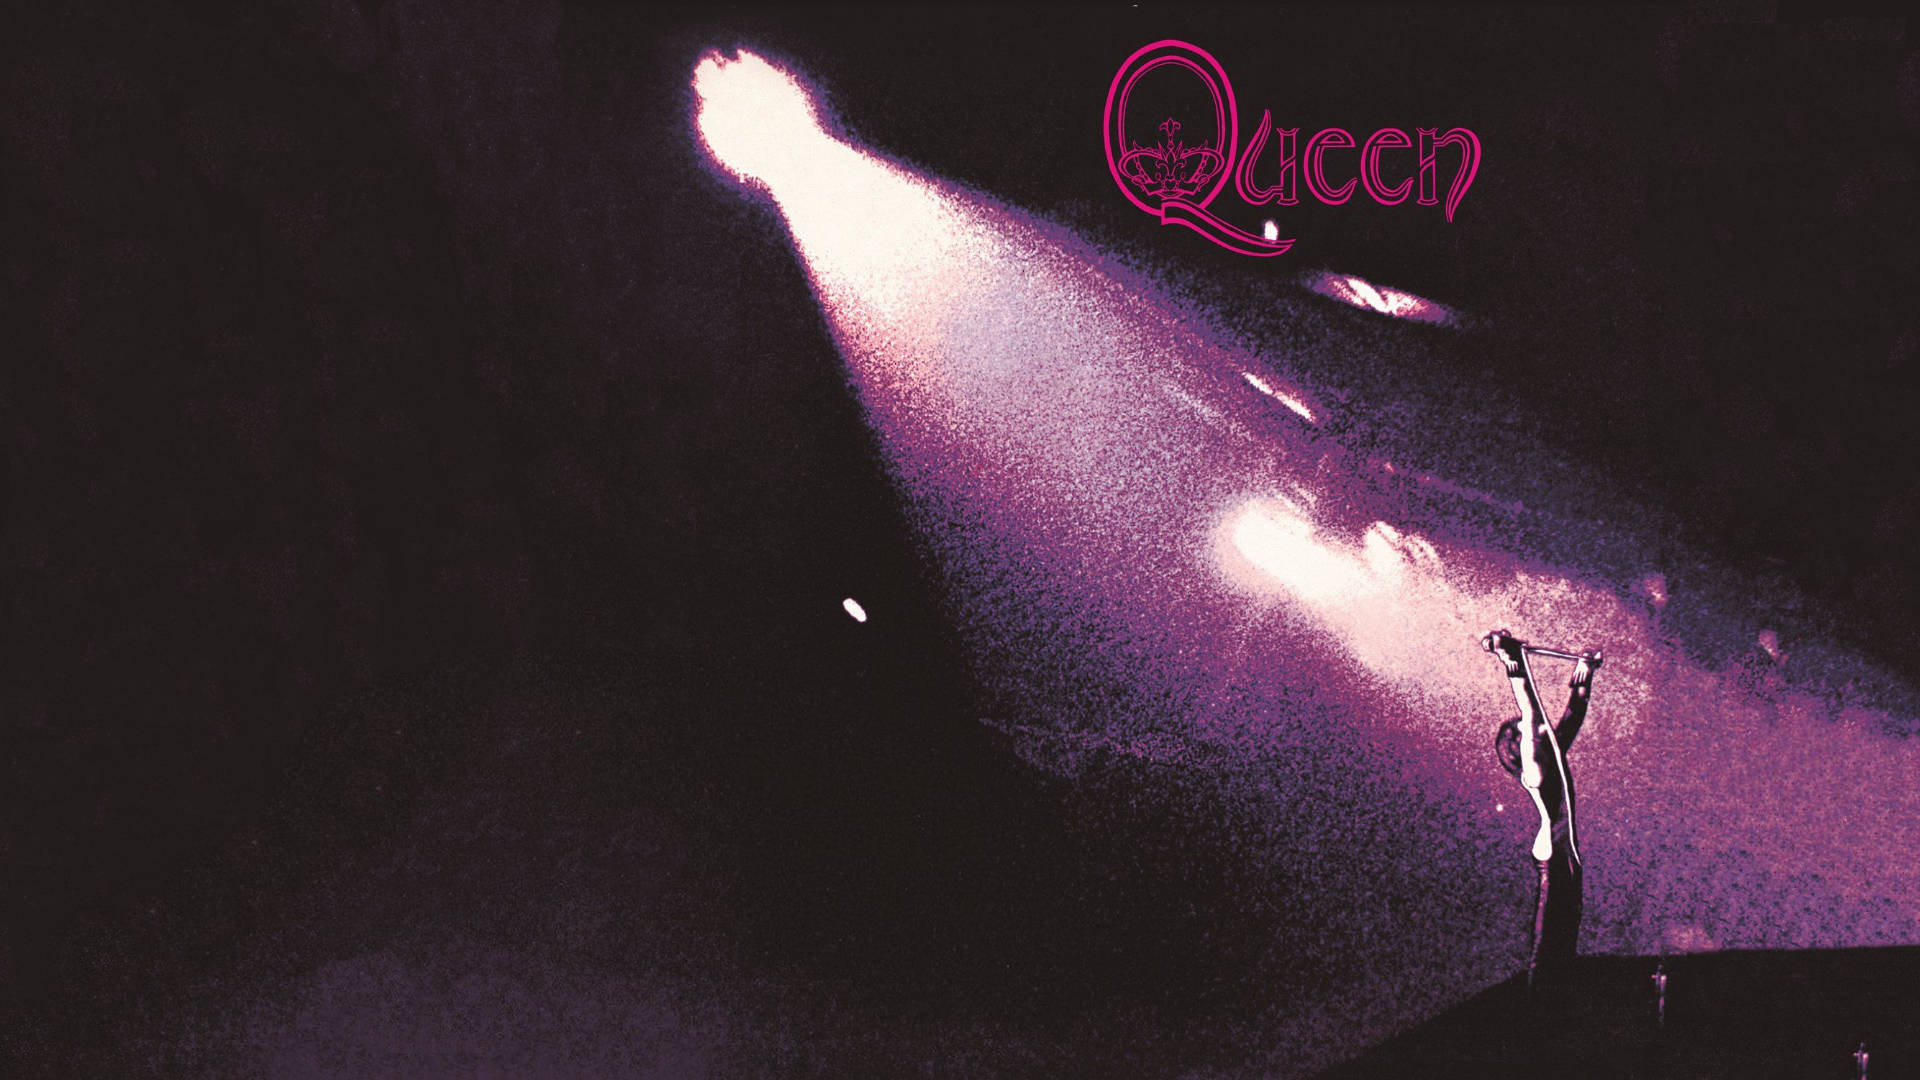 1920X1080 Queen Wallpaper and Background